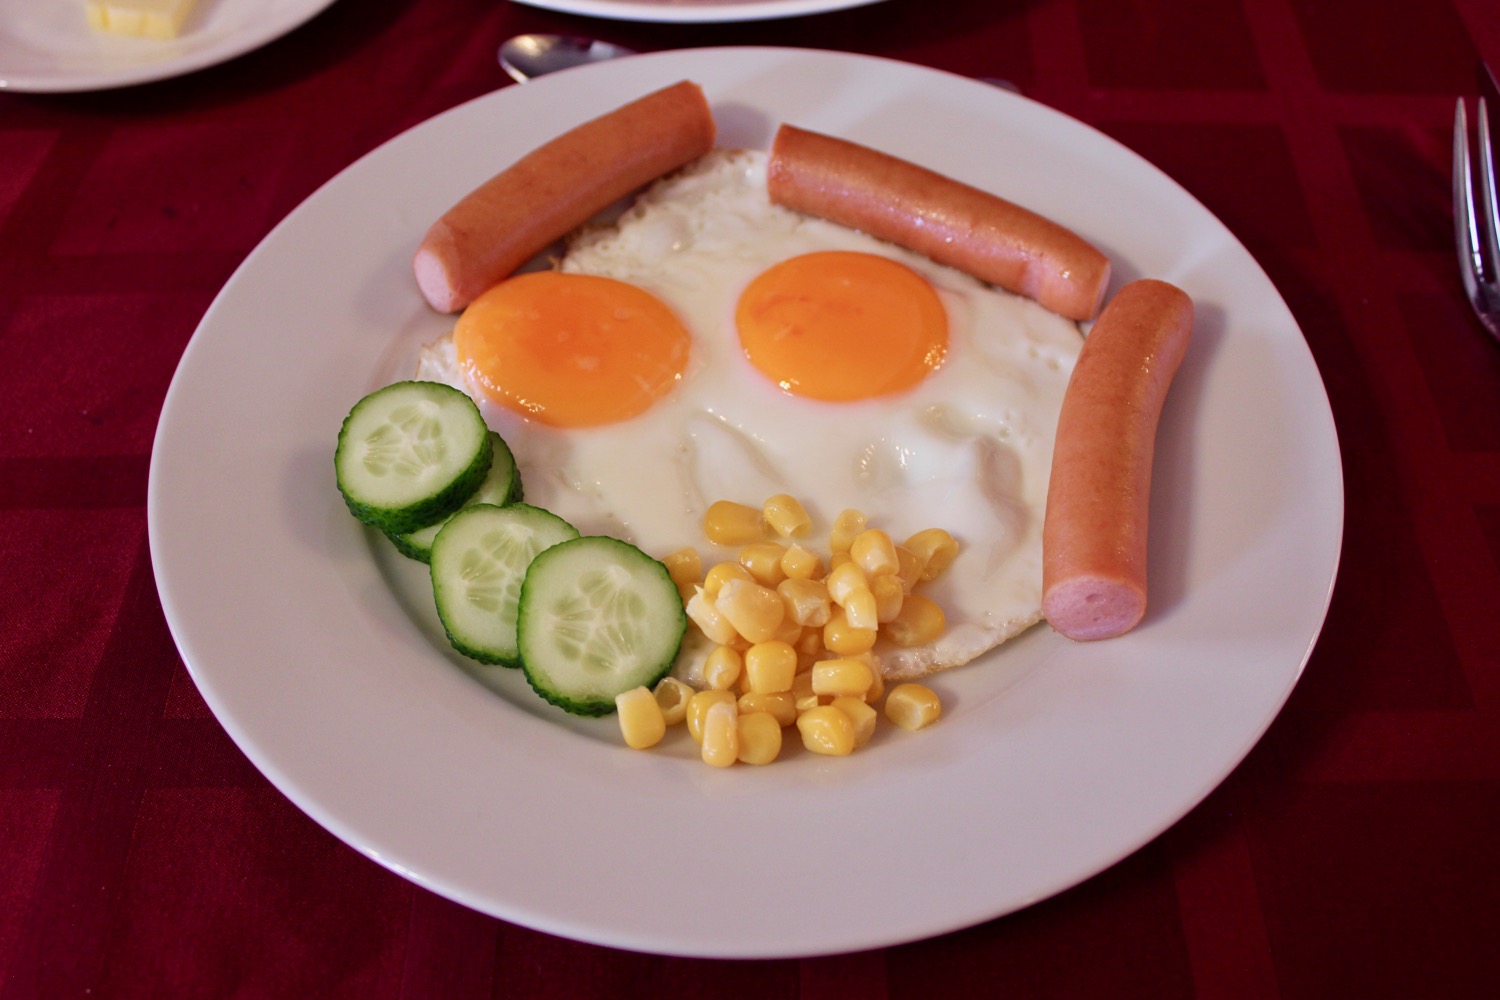 a plate of food with eggs and sausages